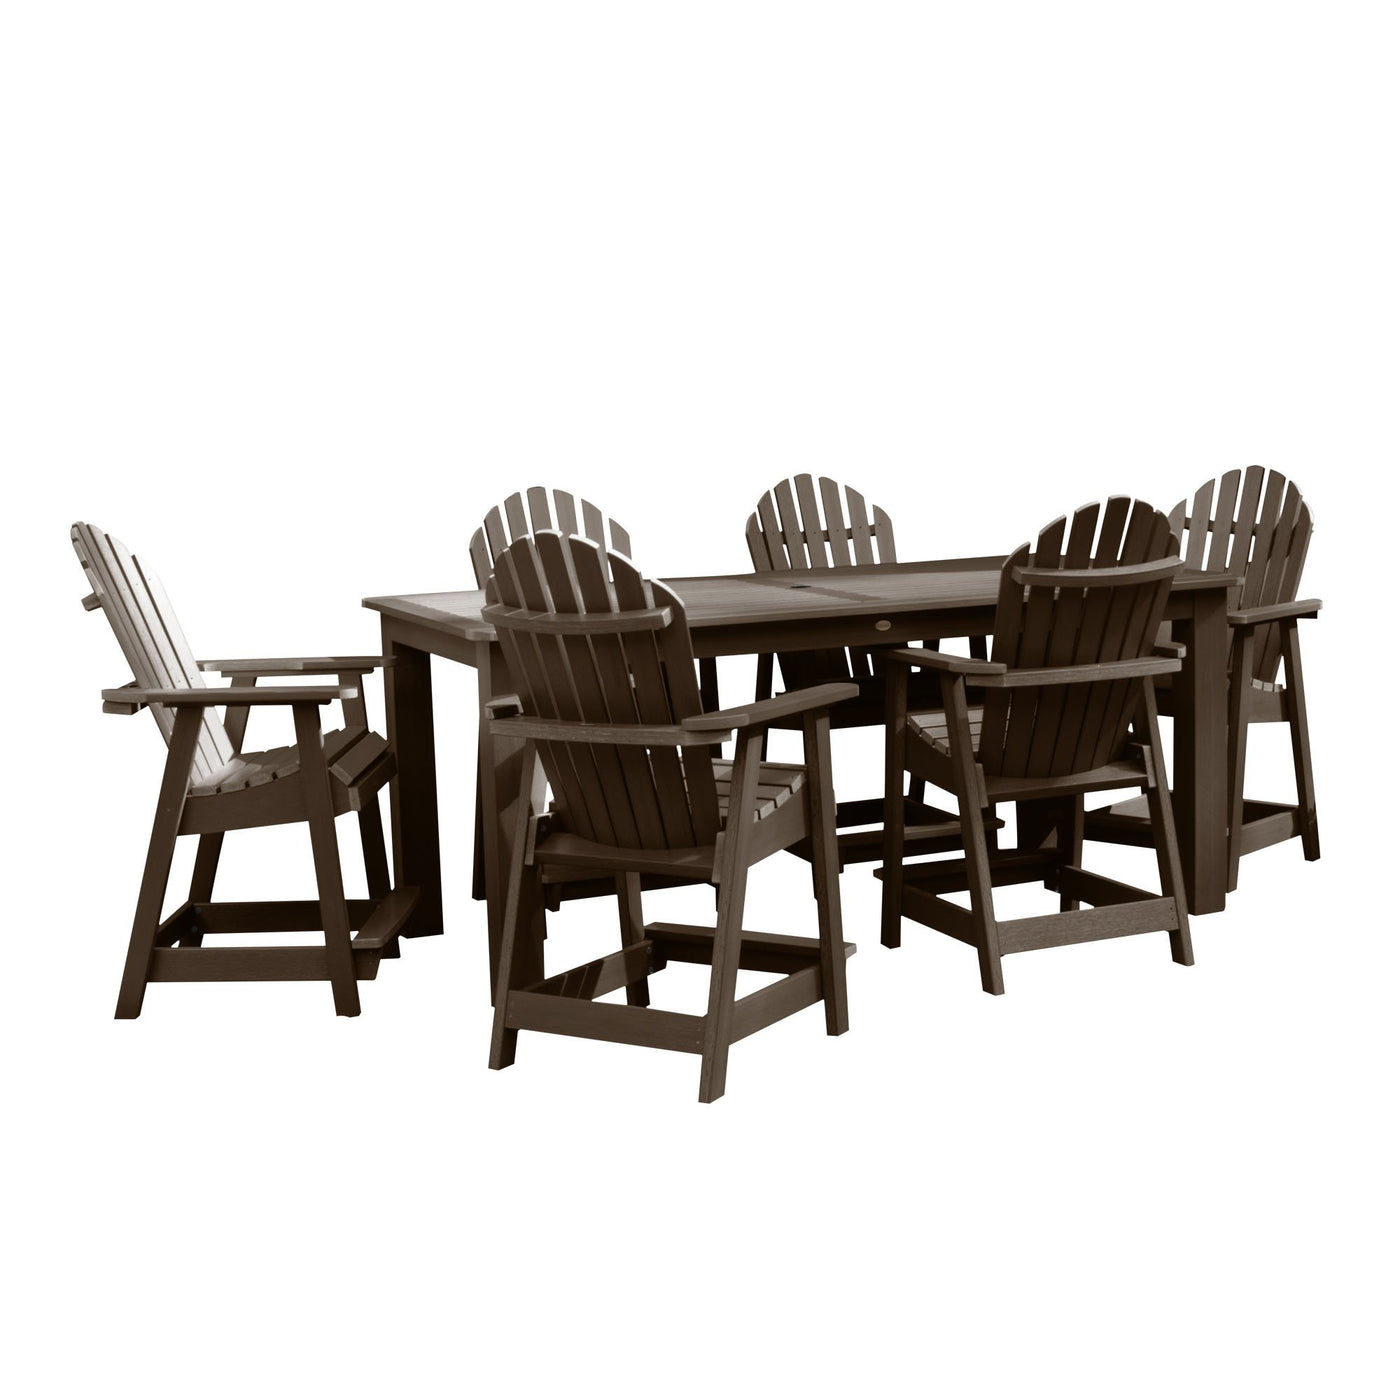 Hamilton 7pc Rectangular Outdoor Dining Set 42in x 84in - Counter Height Dining Highwood USA Weathered Acorn 